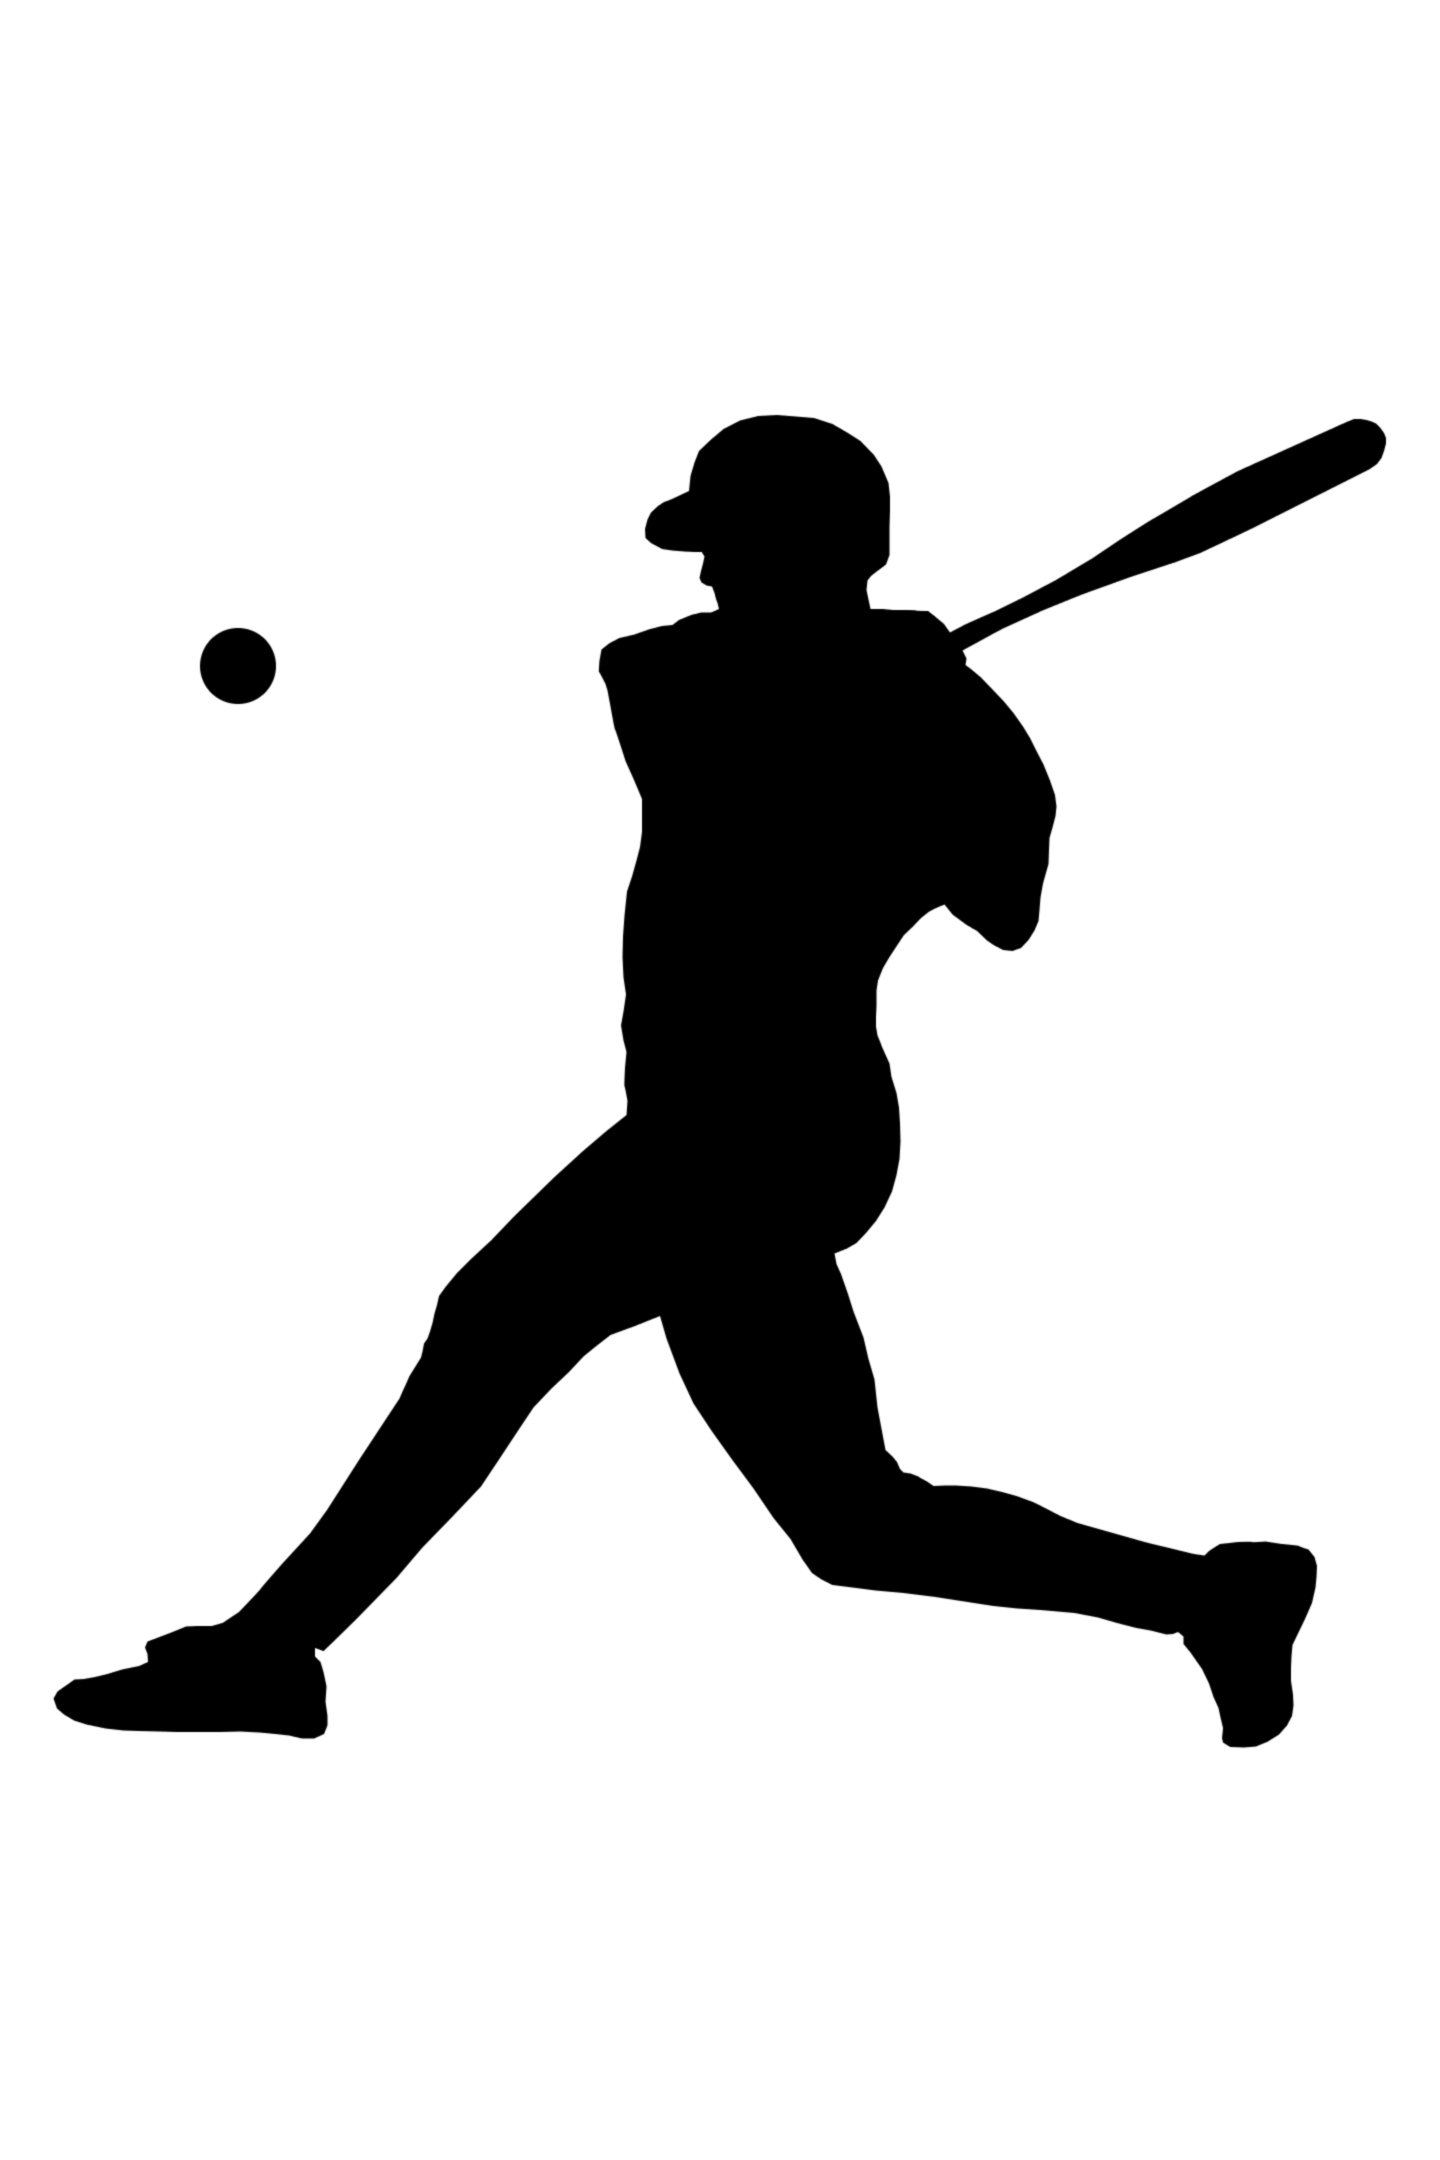 Baseball player with bat - Free sports icons